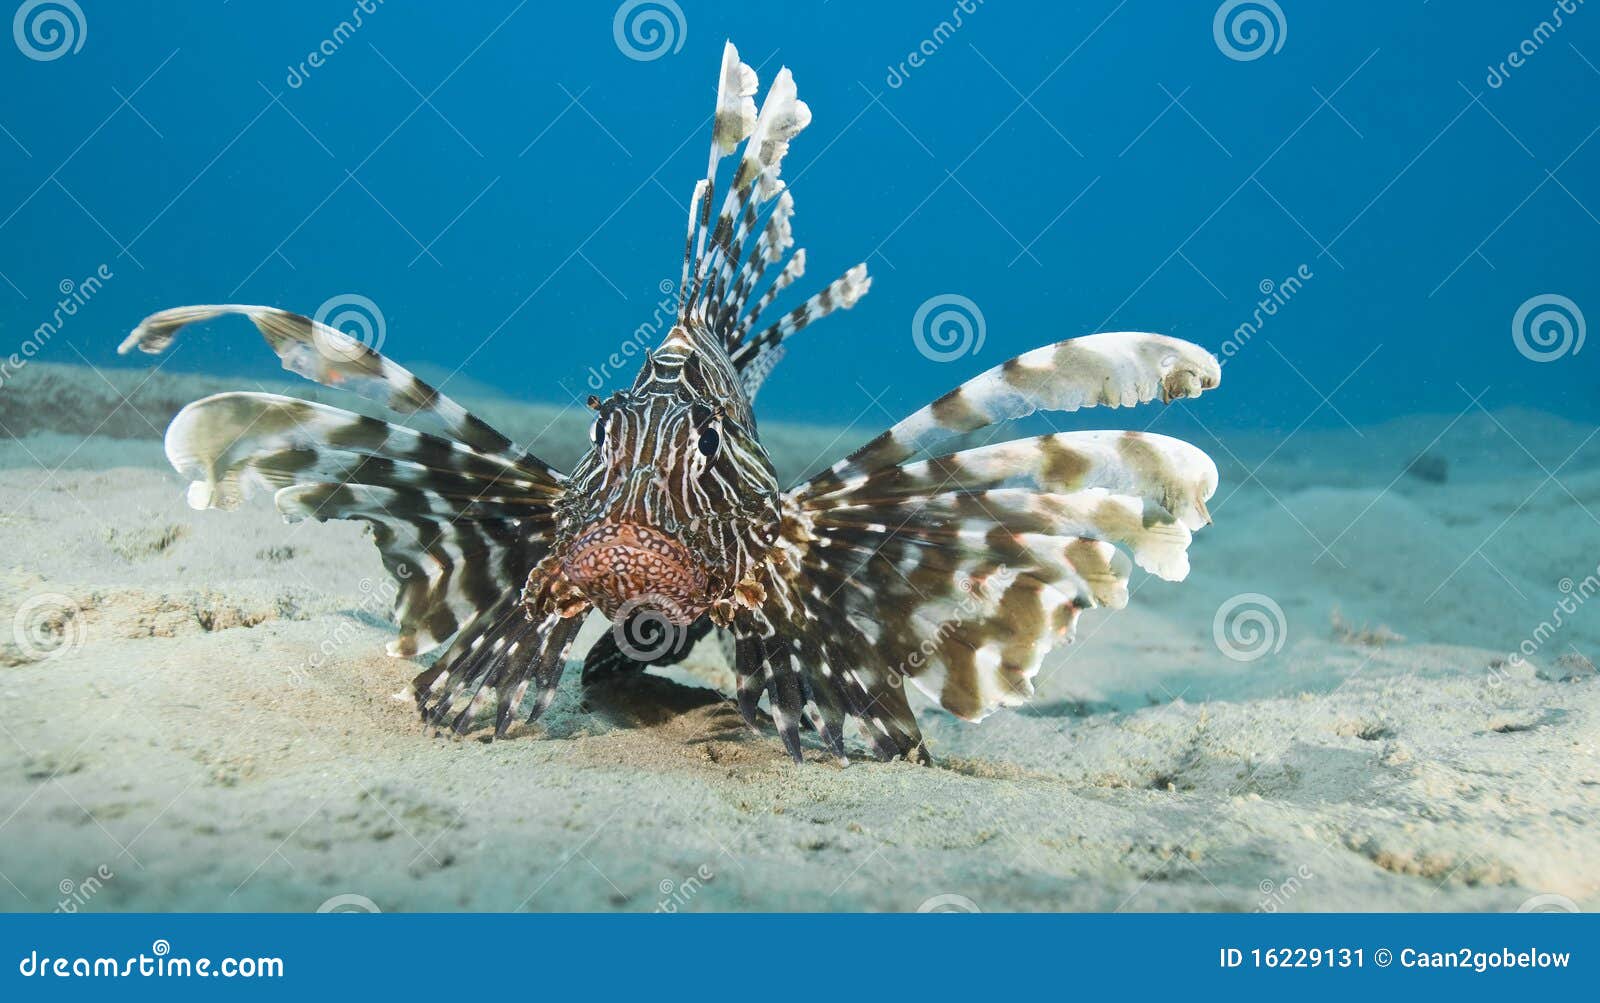 common lionfish on the sandy seabed.